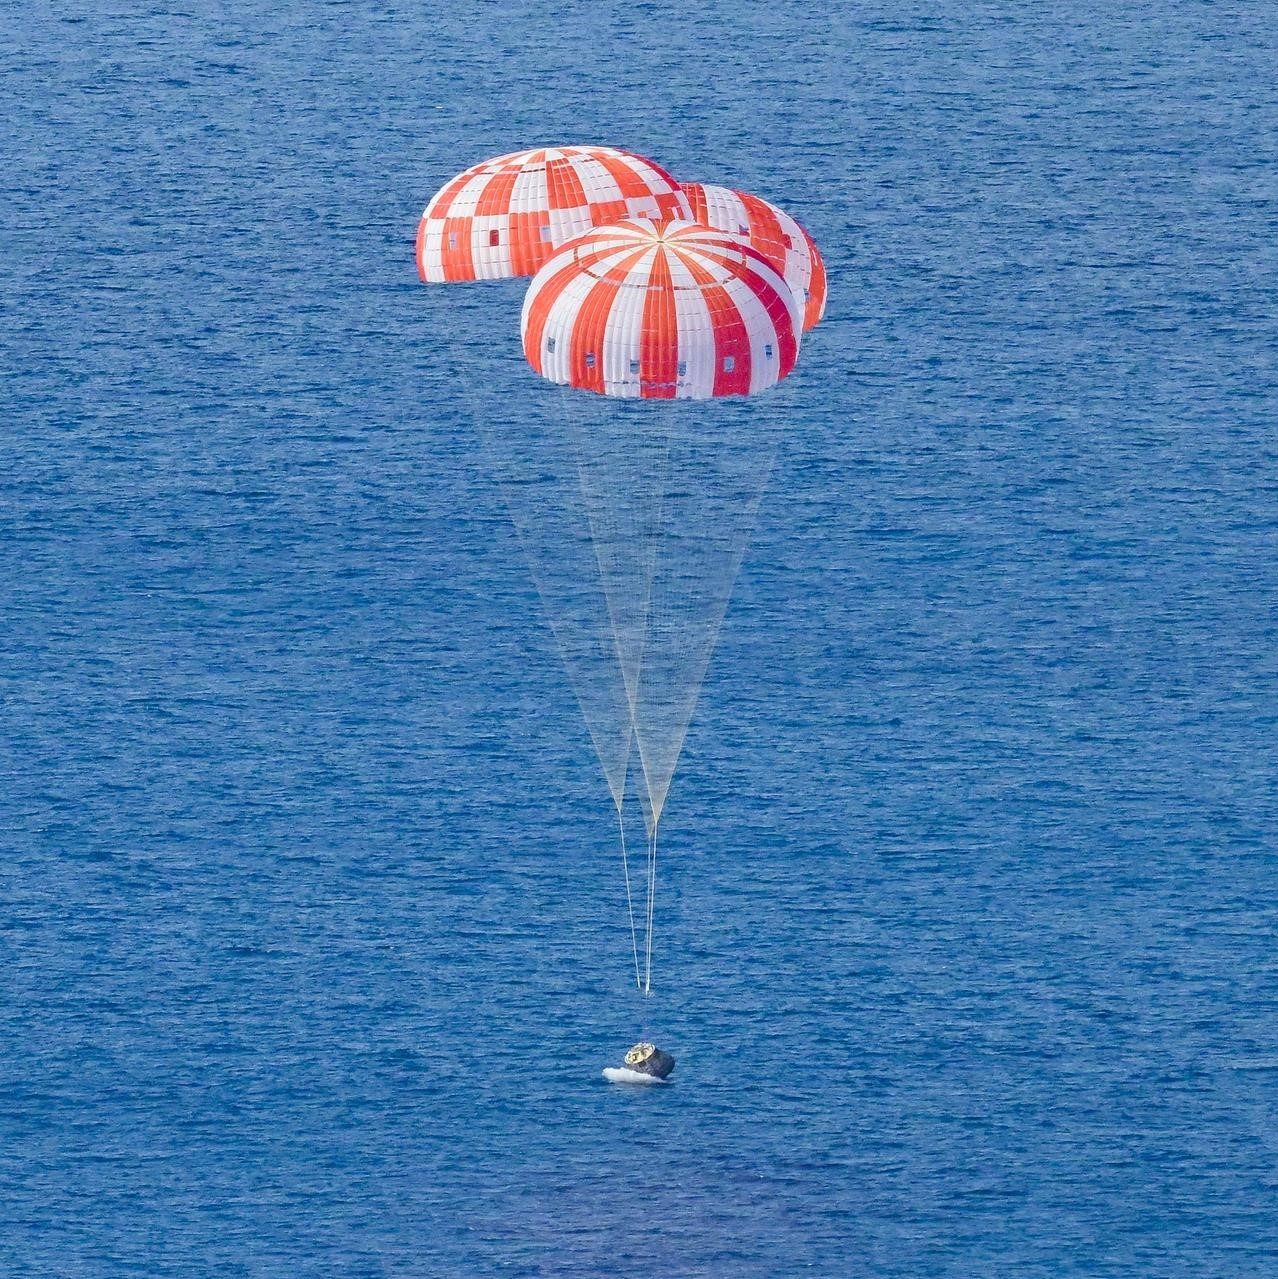 Orion under three opened parachutes splashing down in the Pacific ocean